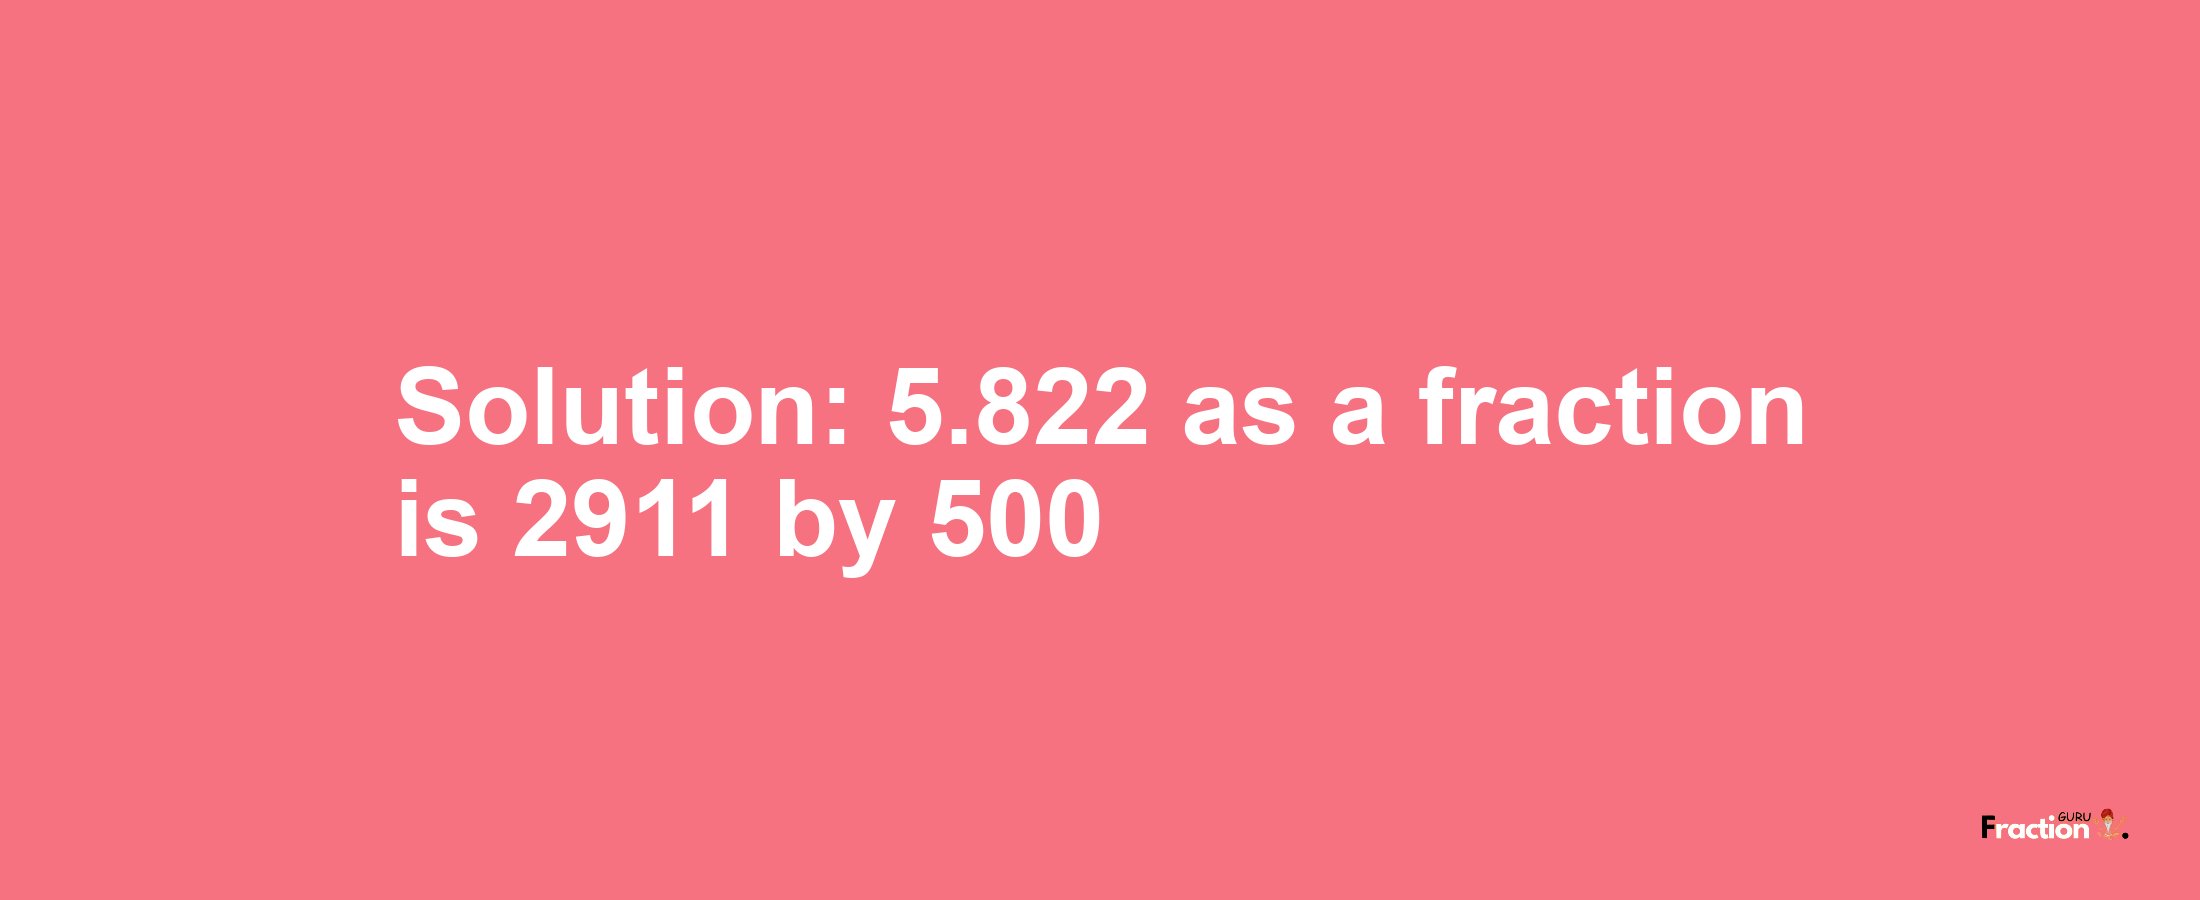 Solution:5.822 as a fraction is 2911/500